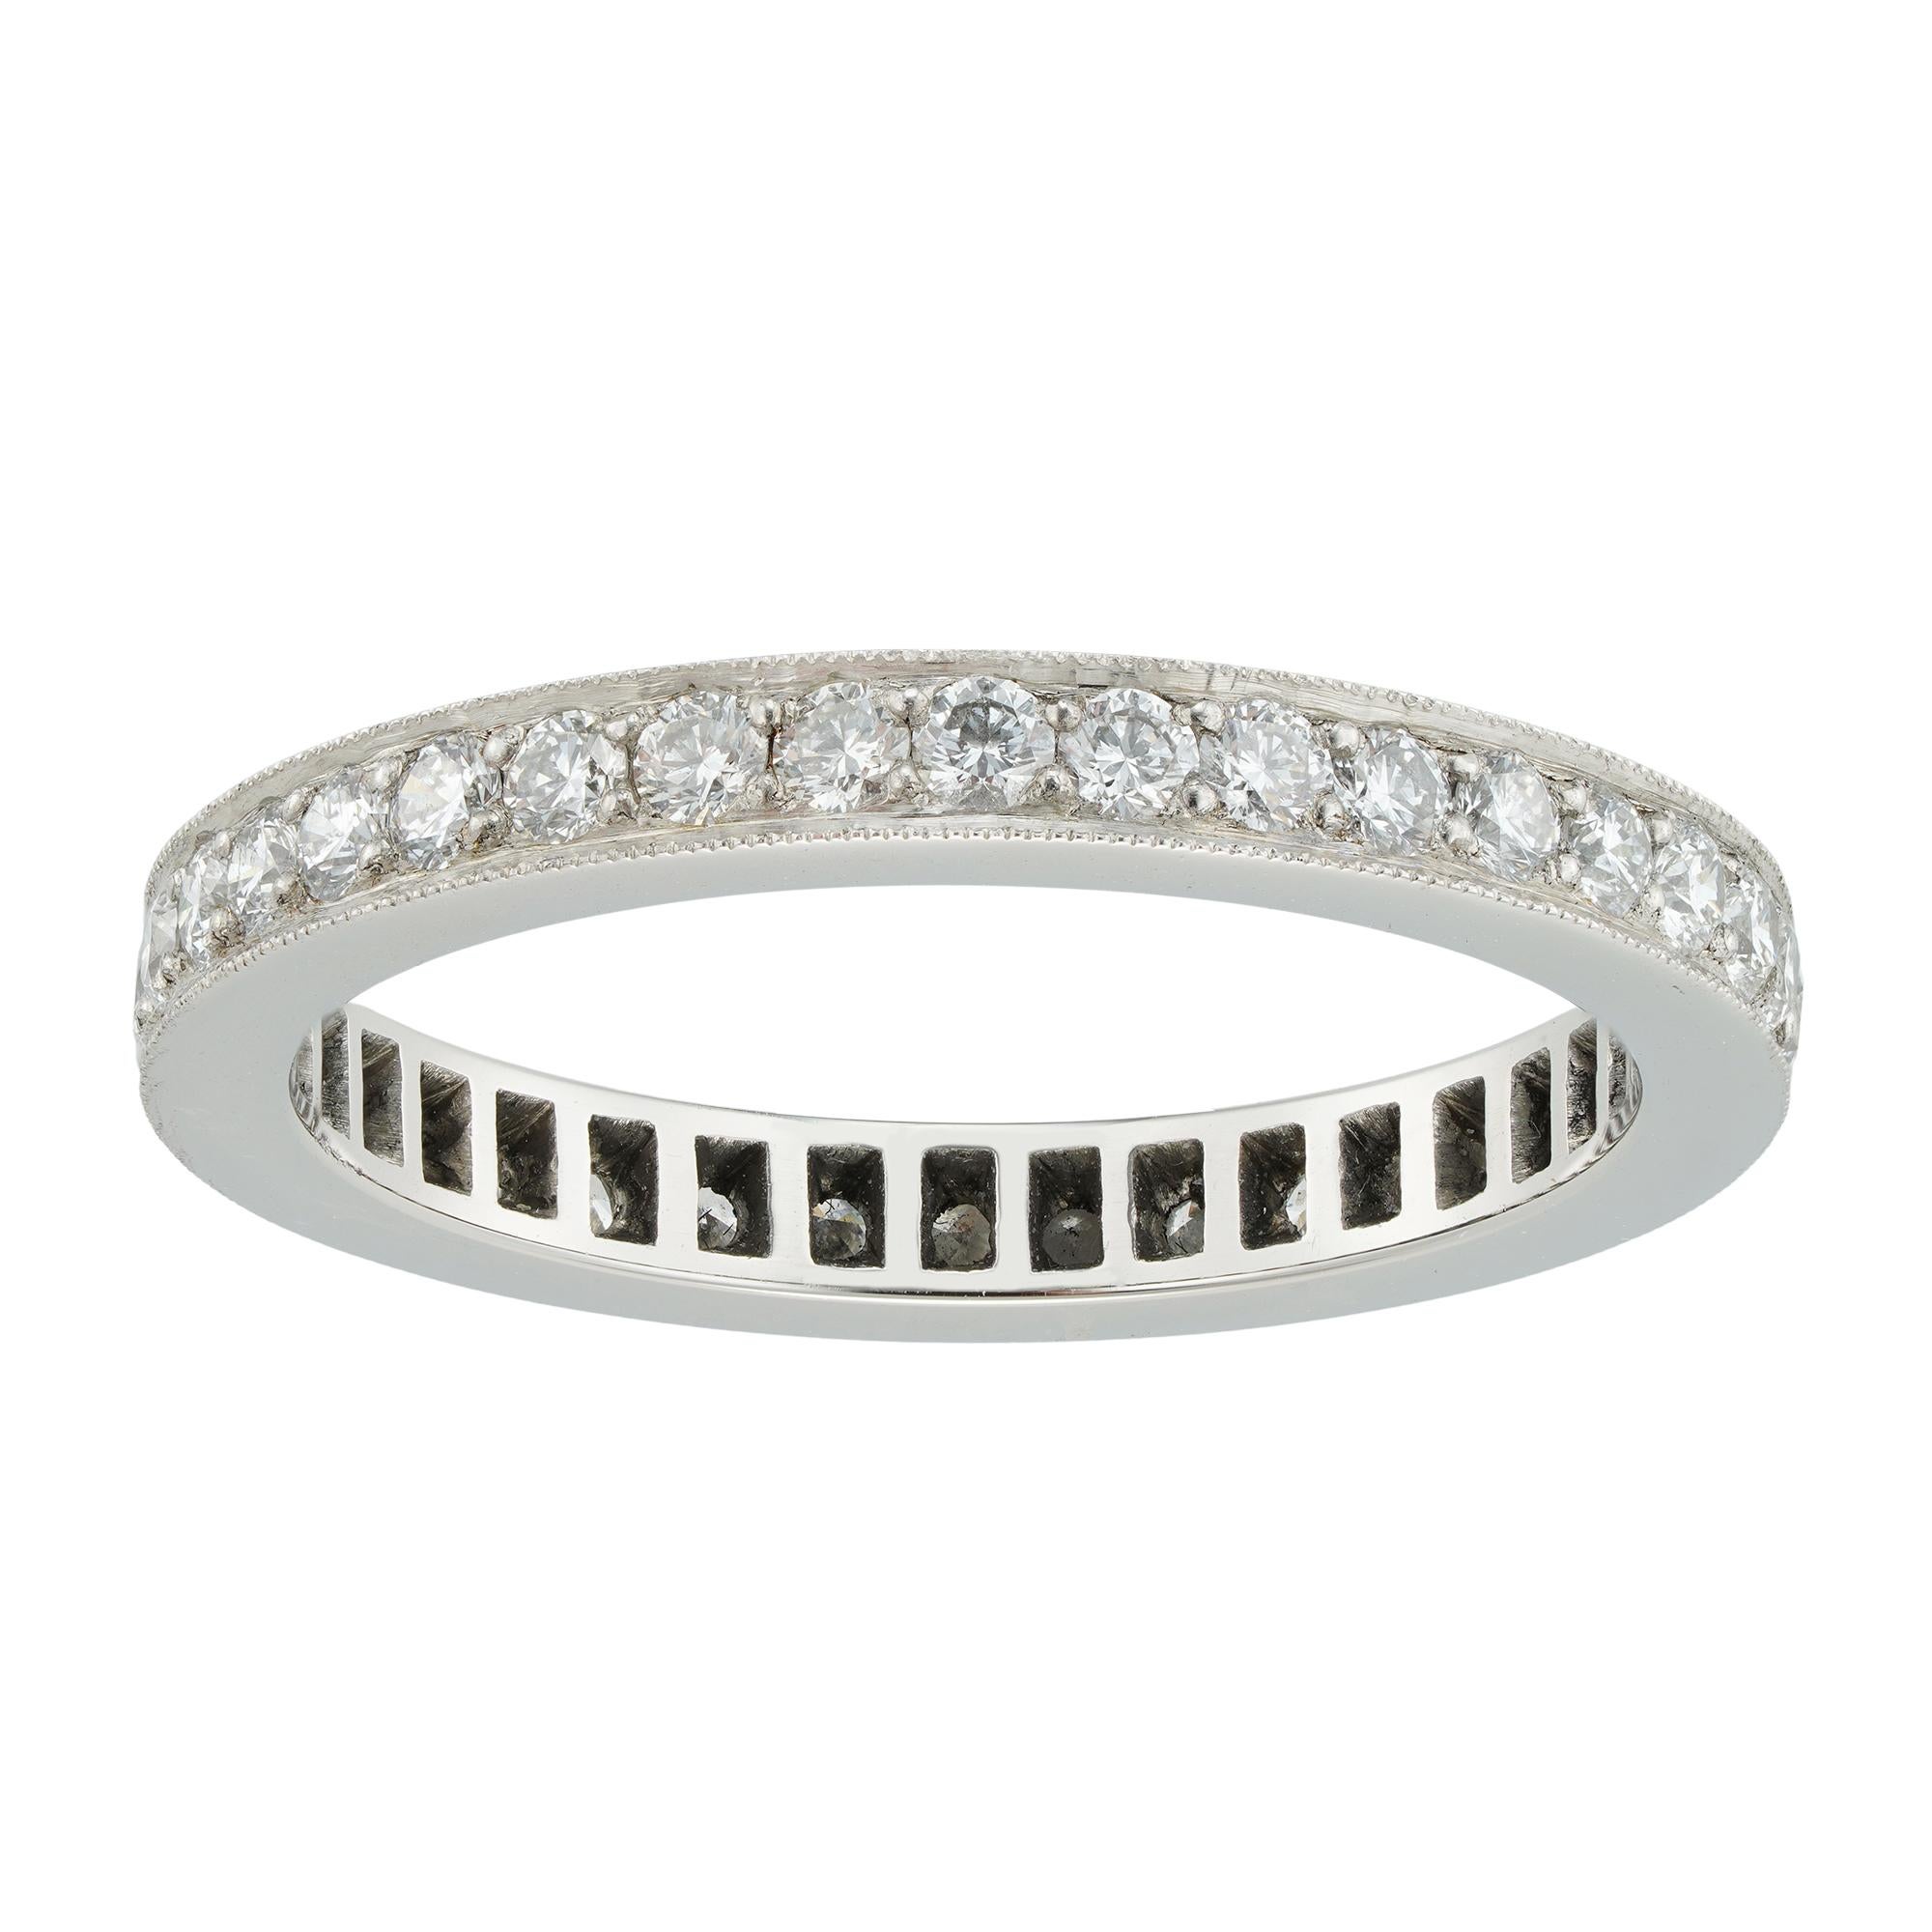 A diamond-set full eternity ring, the thirty-six round brilliant-cut diamonds weighing 0.75 carats in total, all mounted in platinum in a fine millegrain setting, hallmarked platinum 950, London, made by Bentley & Skinner, measuring 21 x 2.5mm,